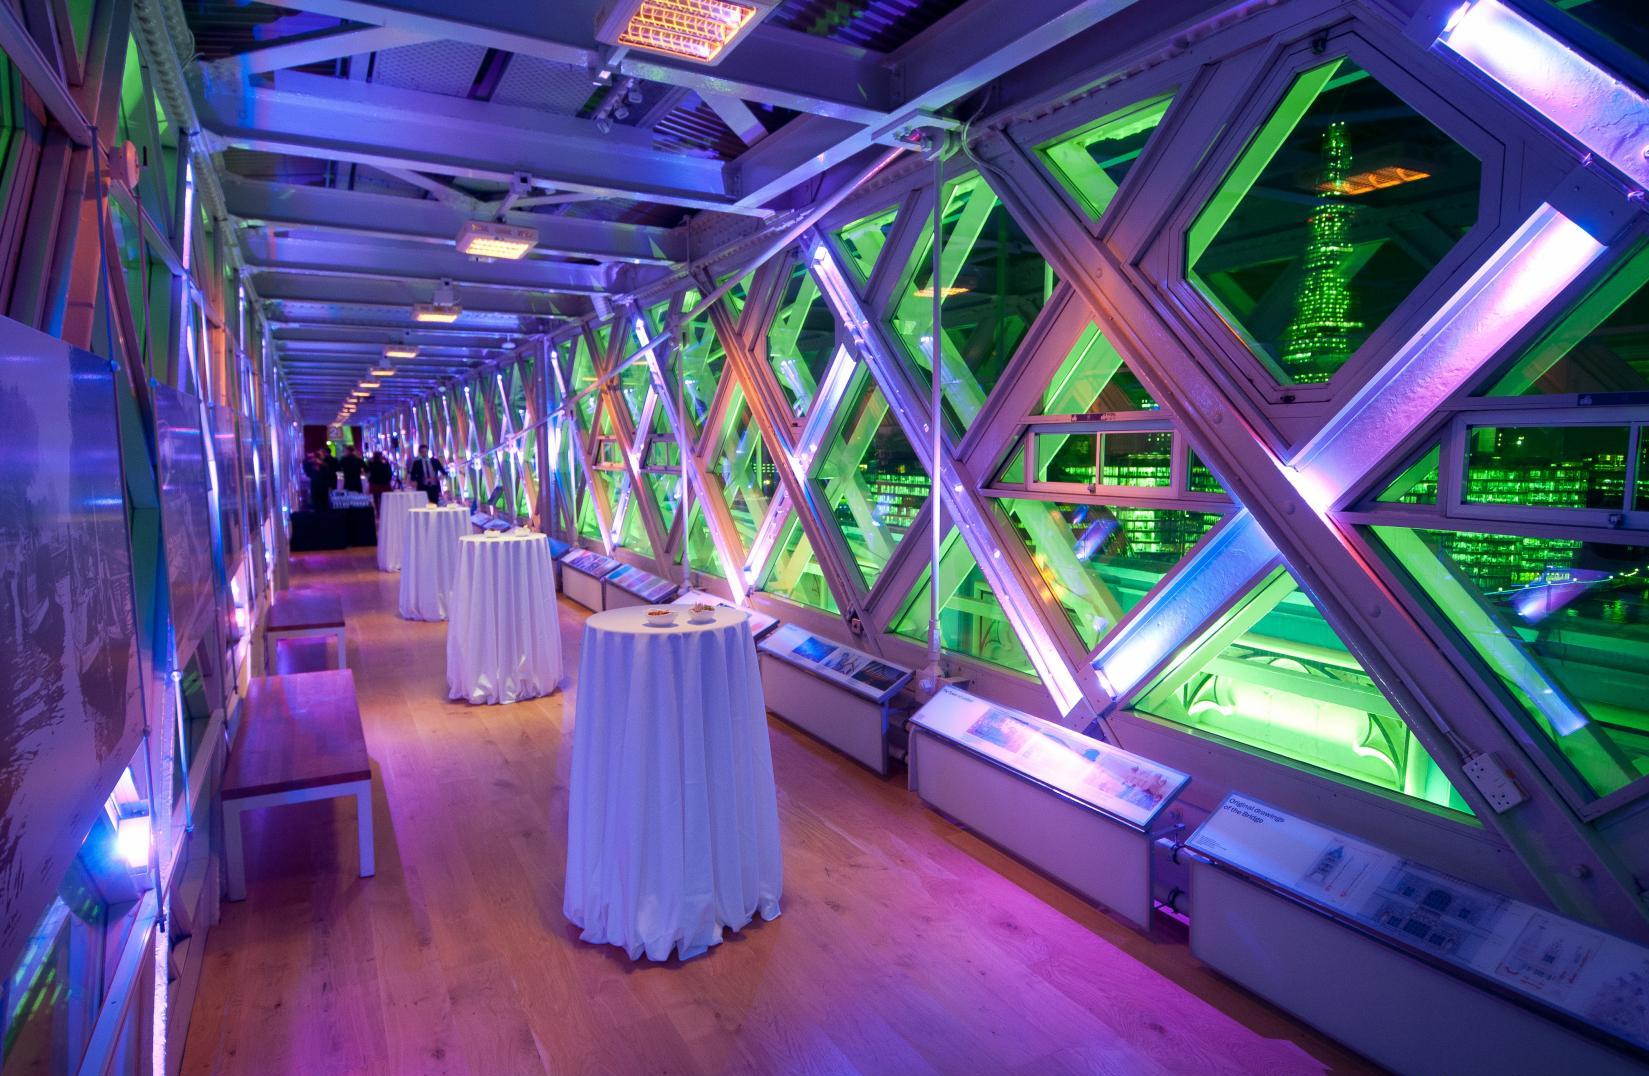 The interior of Tower Bridge set up for a wedding reception at night